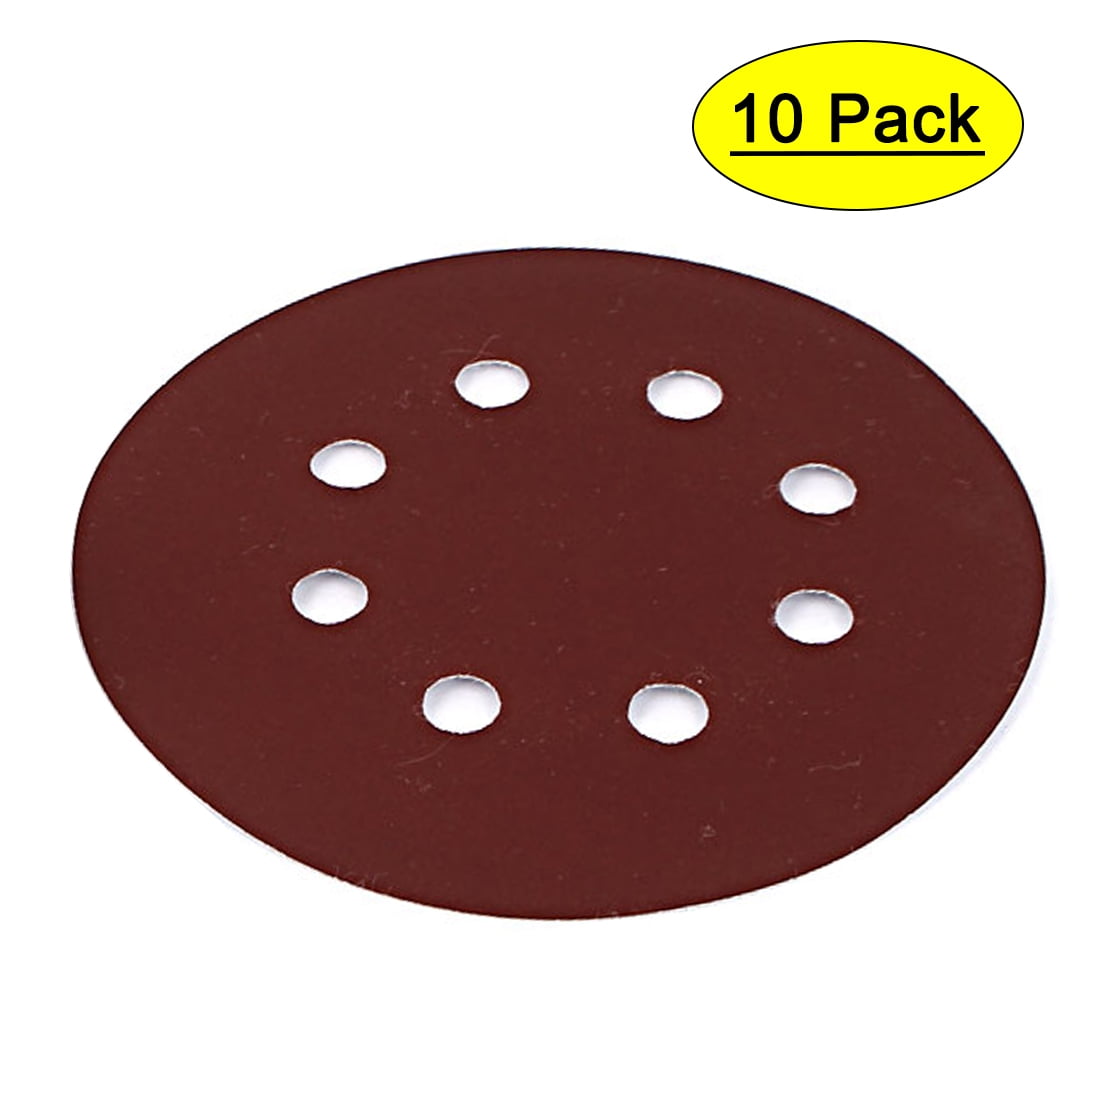 Sticky Backed Sanding Discs 6/'/' Sand Paper Pad 40-800 Grit 150mm Self Adhesive